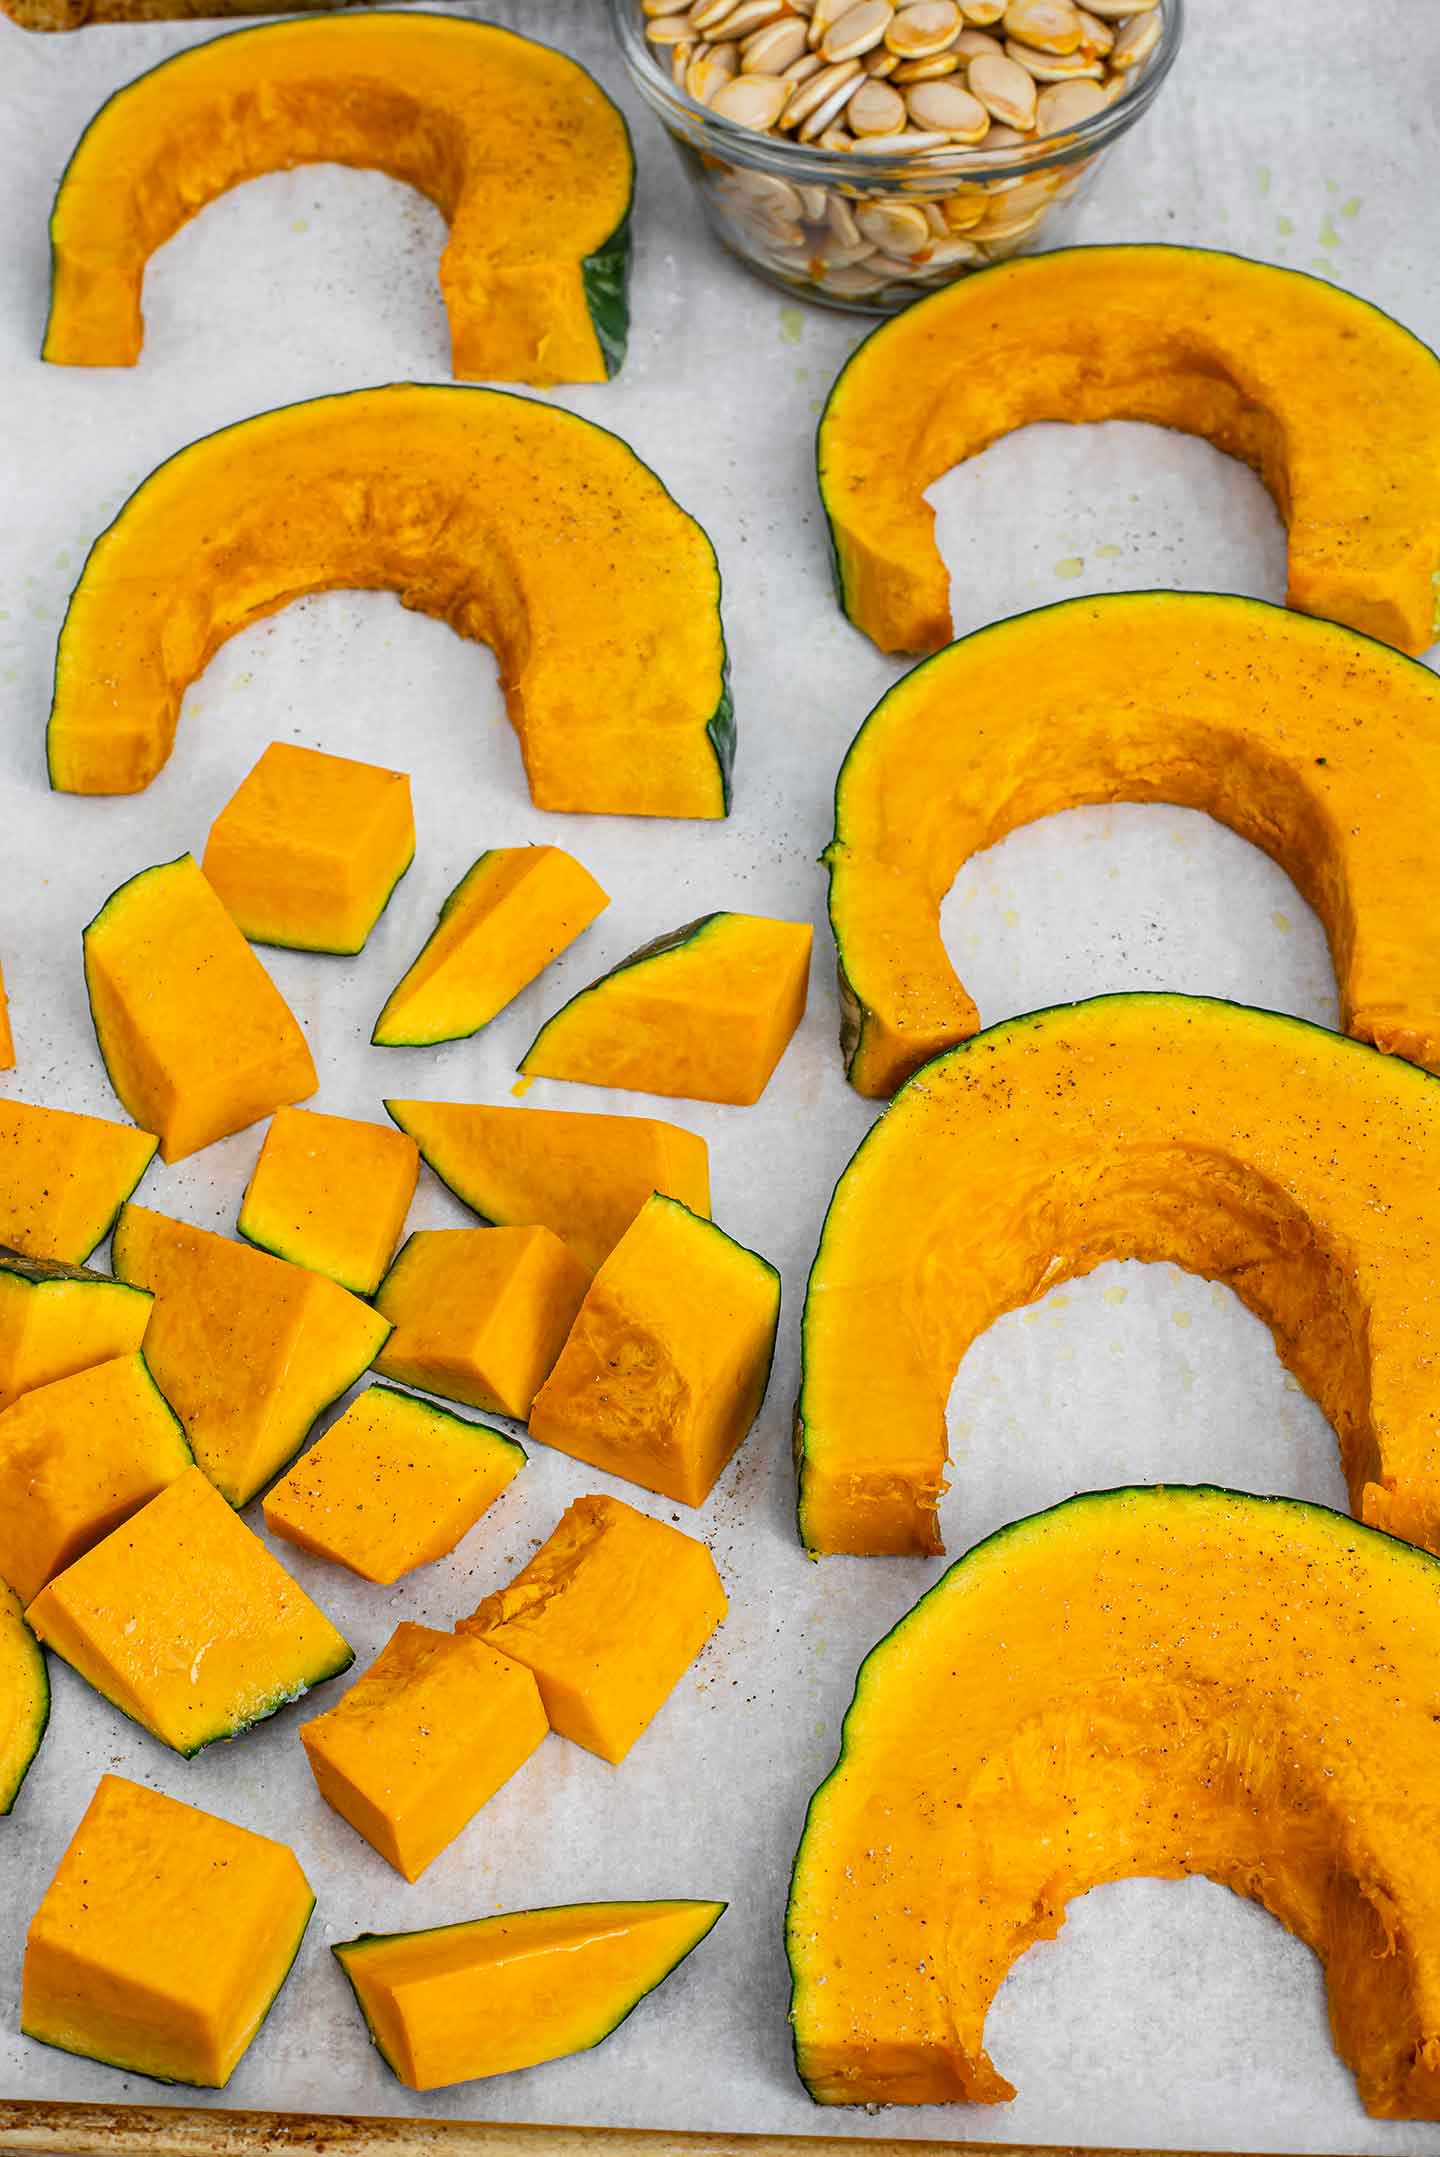 Sliced and cubed squash lays on a baking tray lined with parchment paper. Cleaned seeds fill a small bowl and the peel remains on the squash.